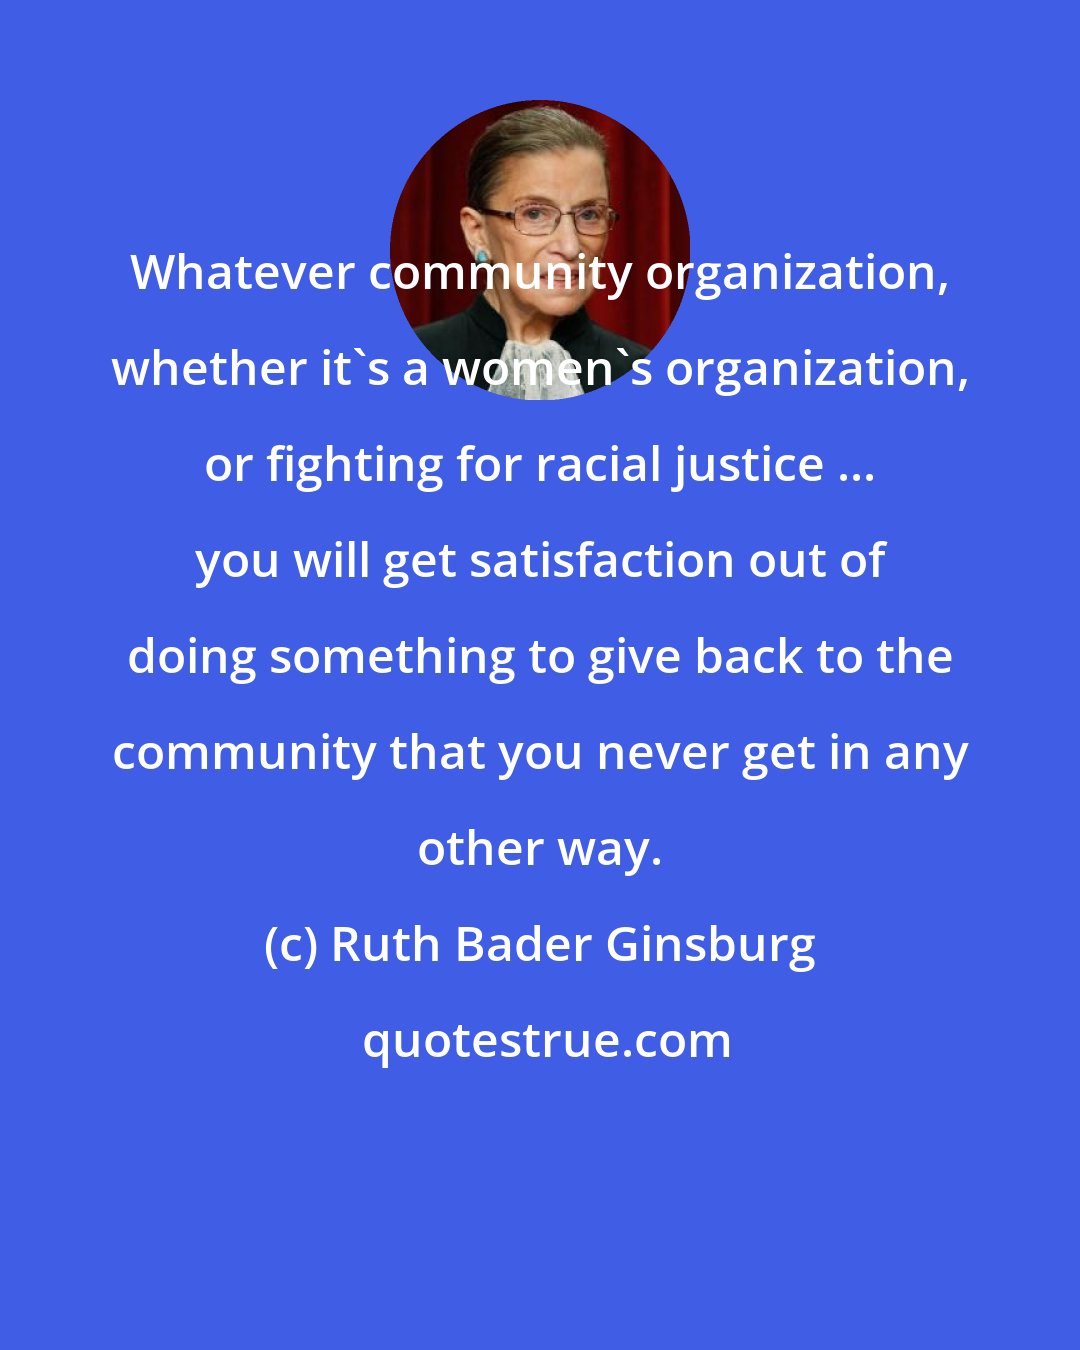 Ruth Bader Ginsburg: Whatever community organization, whether it's a women's organization, or fighting for racial justice ... you will get satisfaction out of doing something to give back to the community that you never get in any other way.